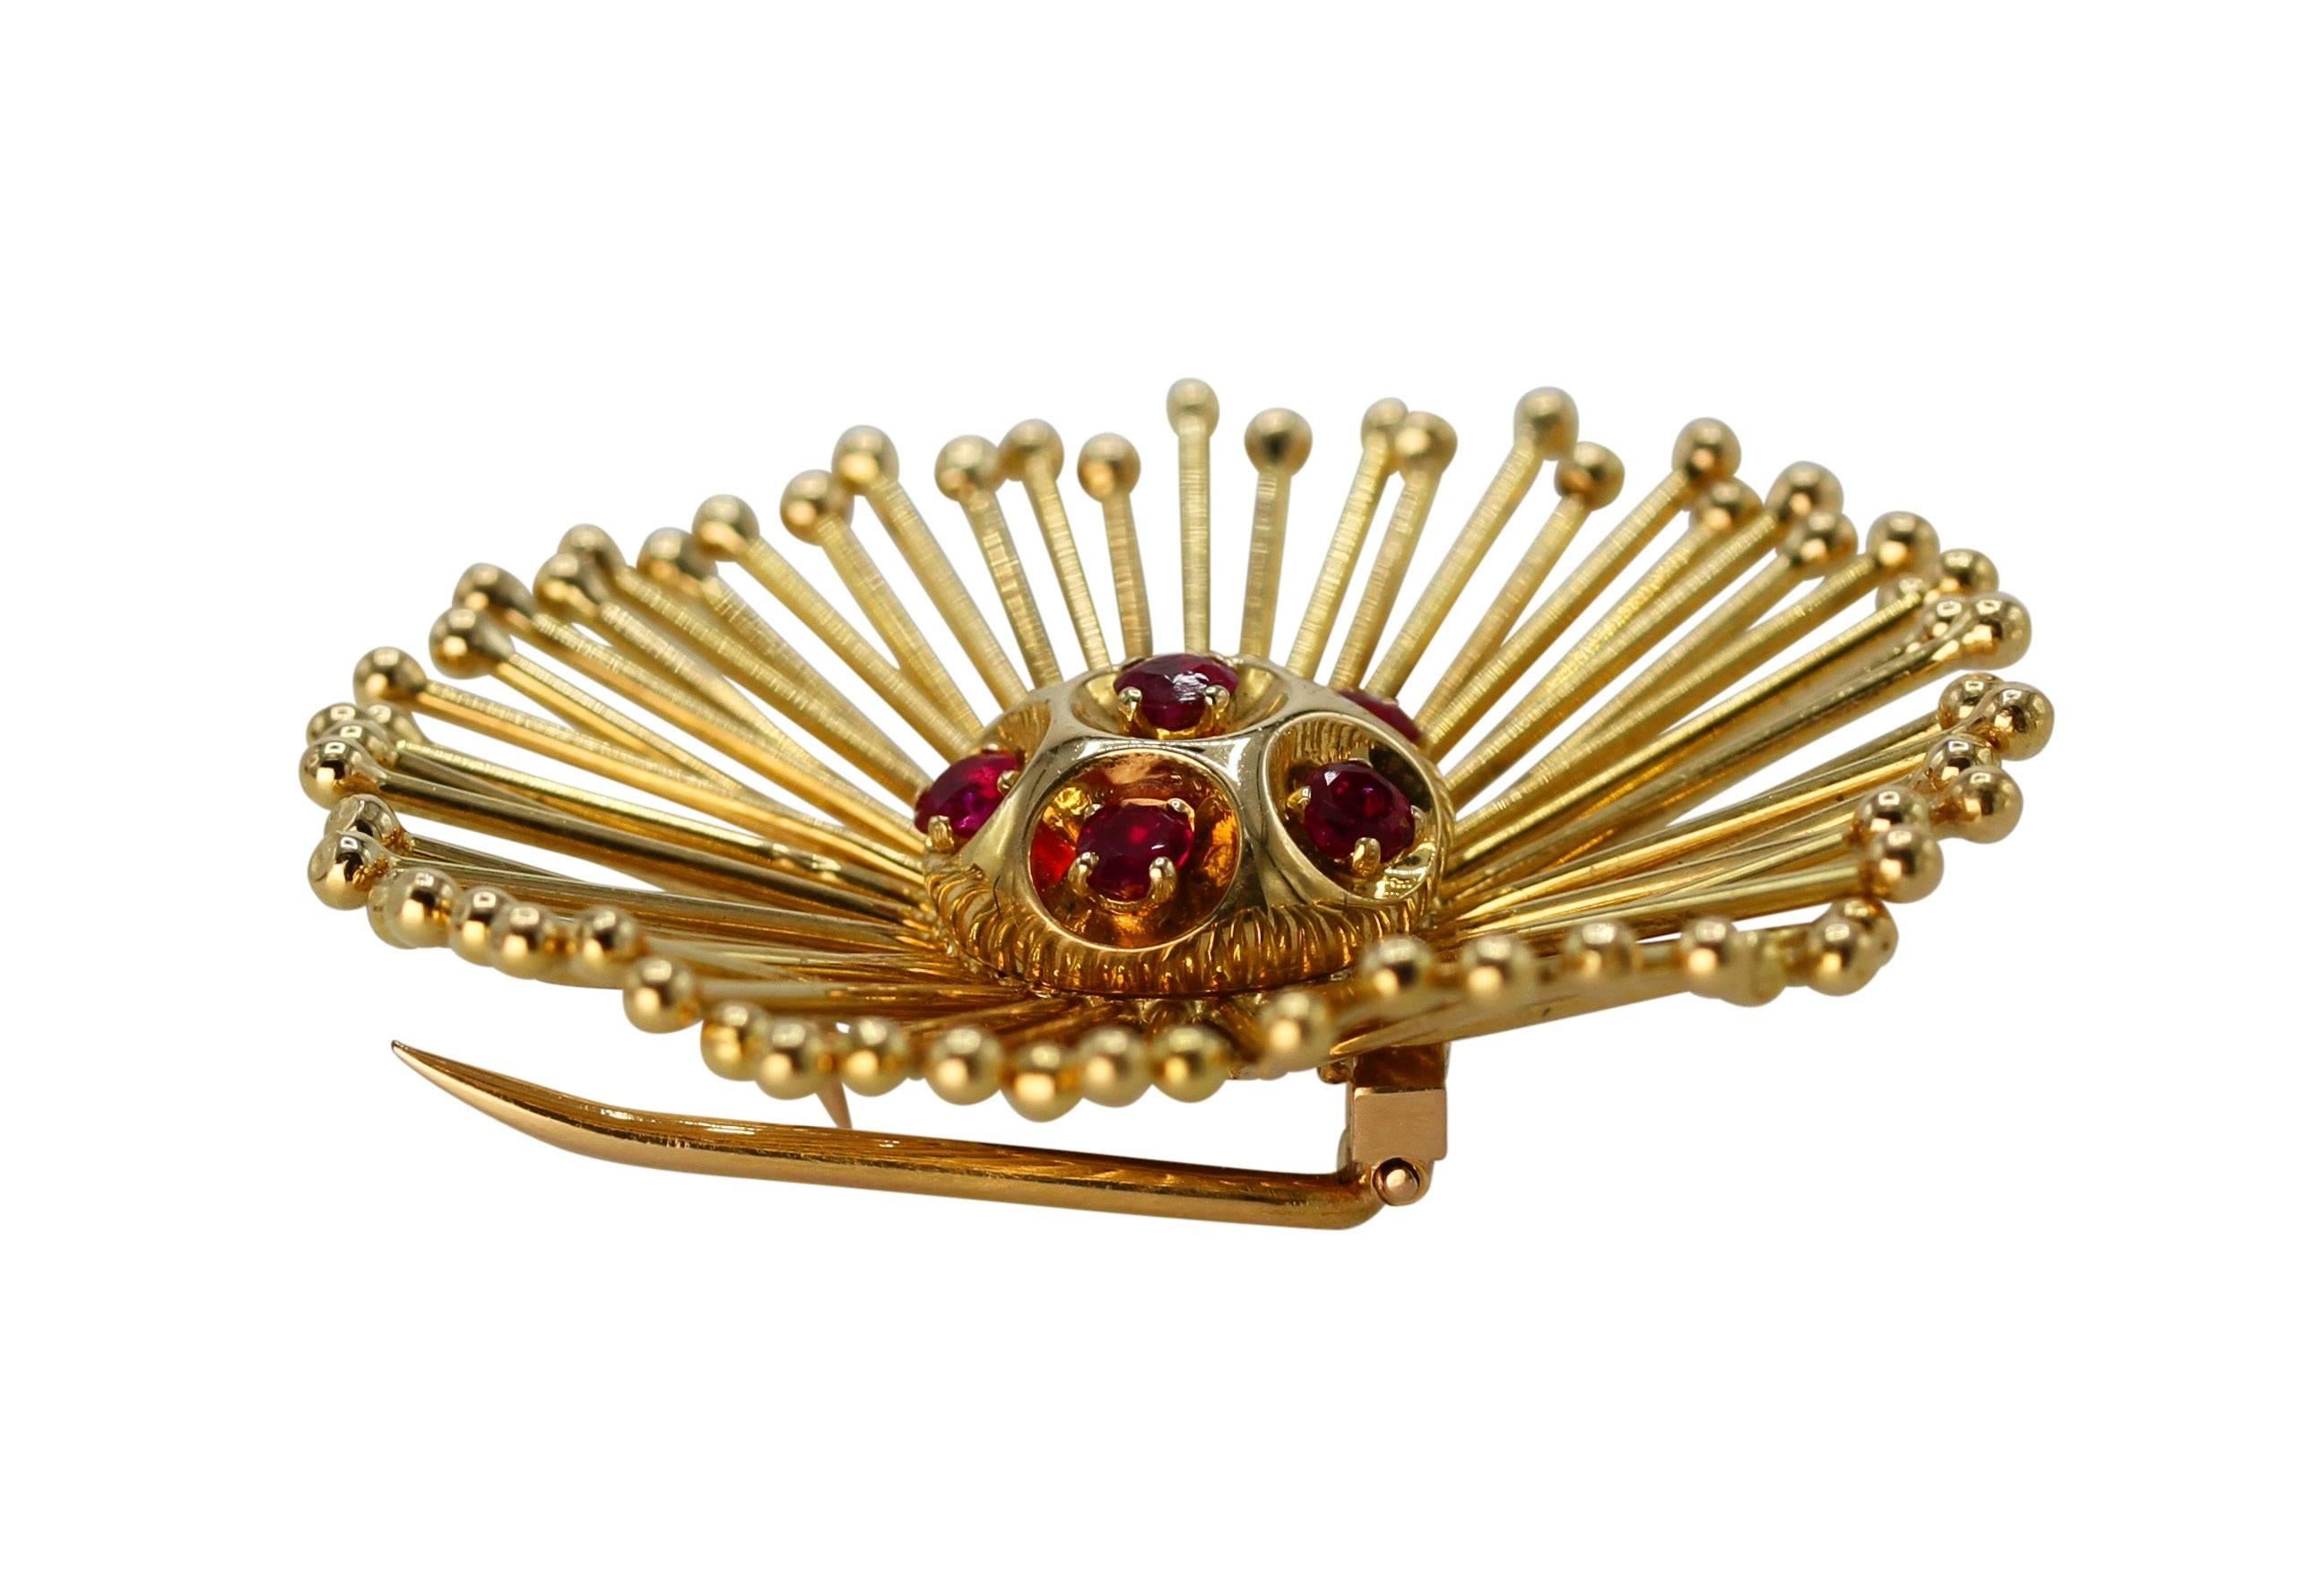 An 18 karat yellow gold and ruby brooch by Cartier, France, circa 1960, designed as a stylized flowerhead set in the center with 6 round rubies weighing approximately 1.00 carat, with numerous gold tendrils as petals, gross weight 20.2 grams,